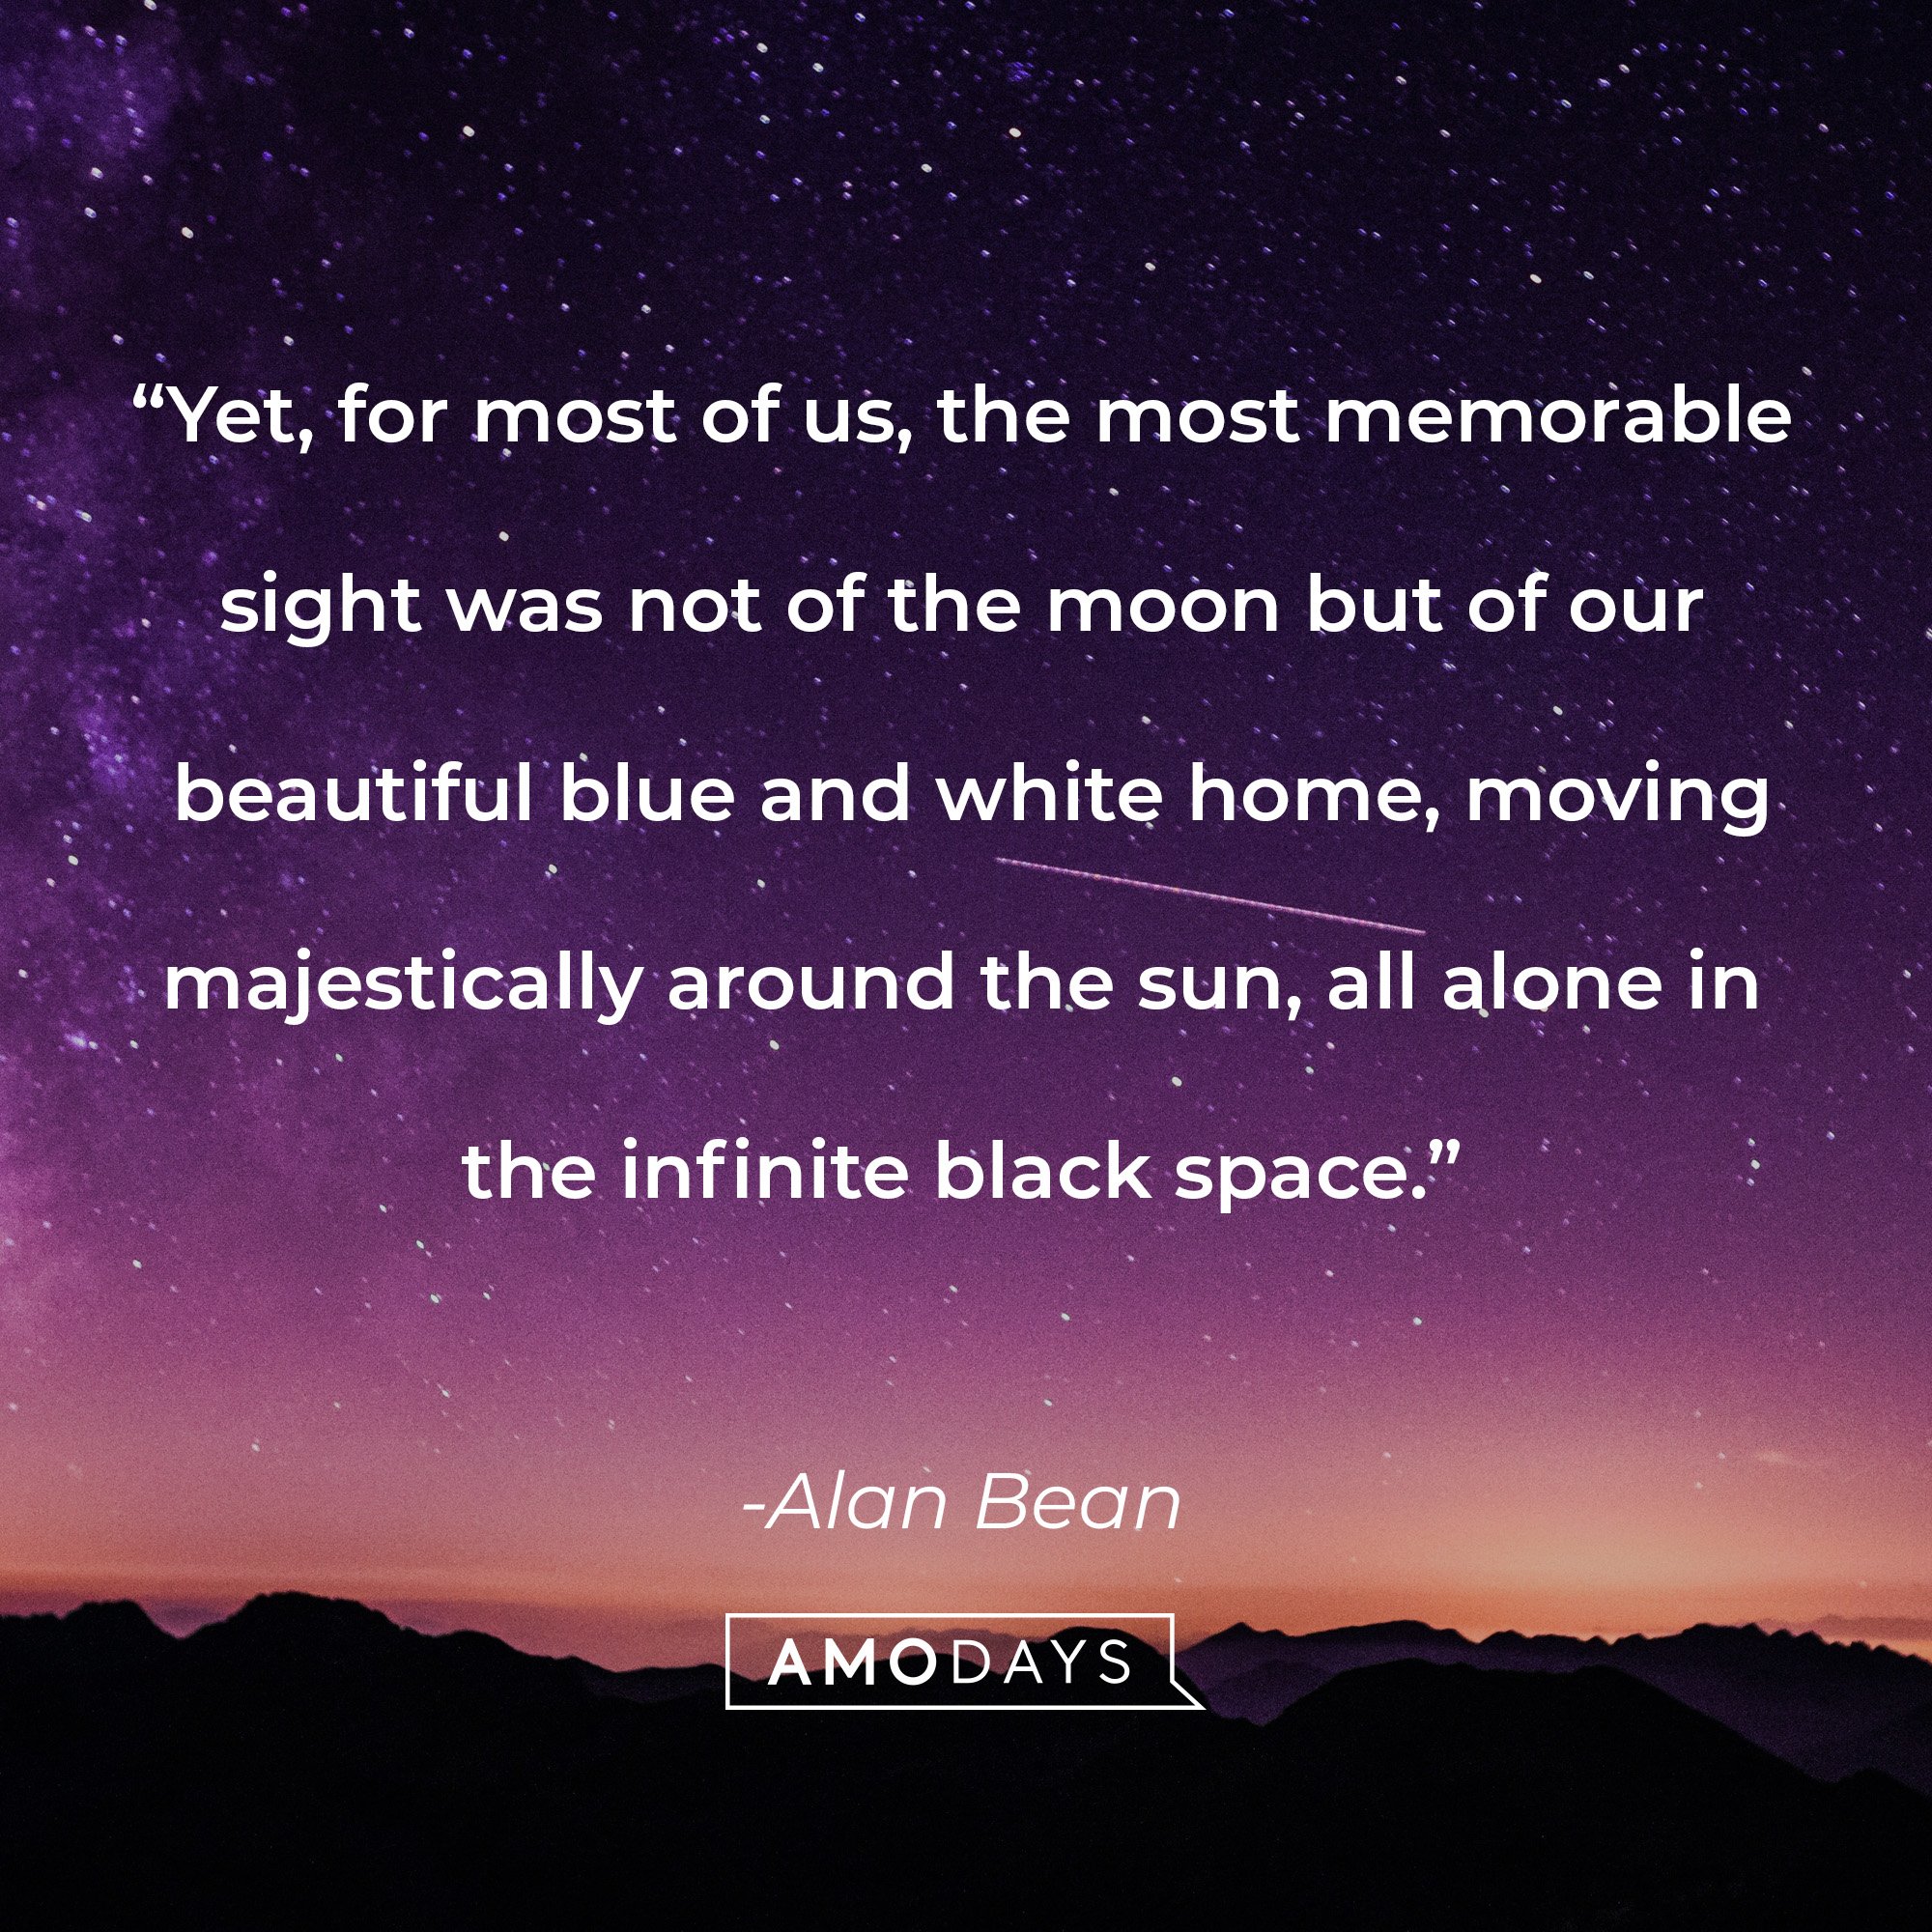 Alan Bea’s quote: Yet, for most of us, the most memorable sight was not of the moon, but of our beautiful blue and white home, moving majestically around the sun, all alone and infinite black space.” | Image: AmoDays 